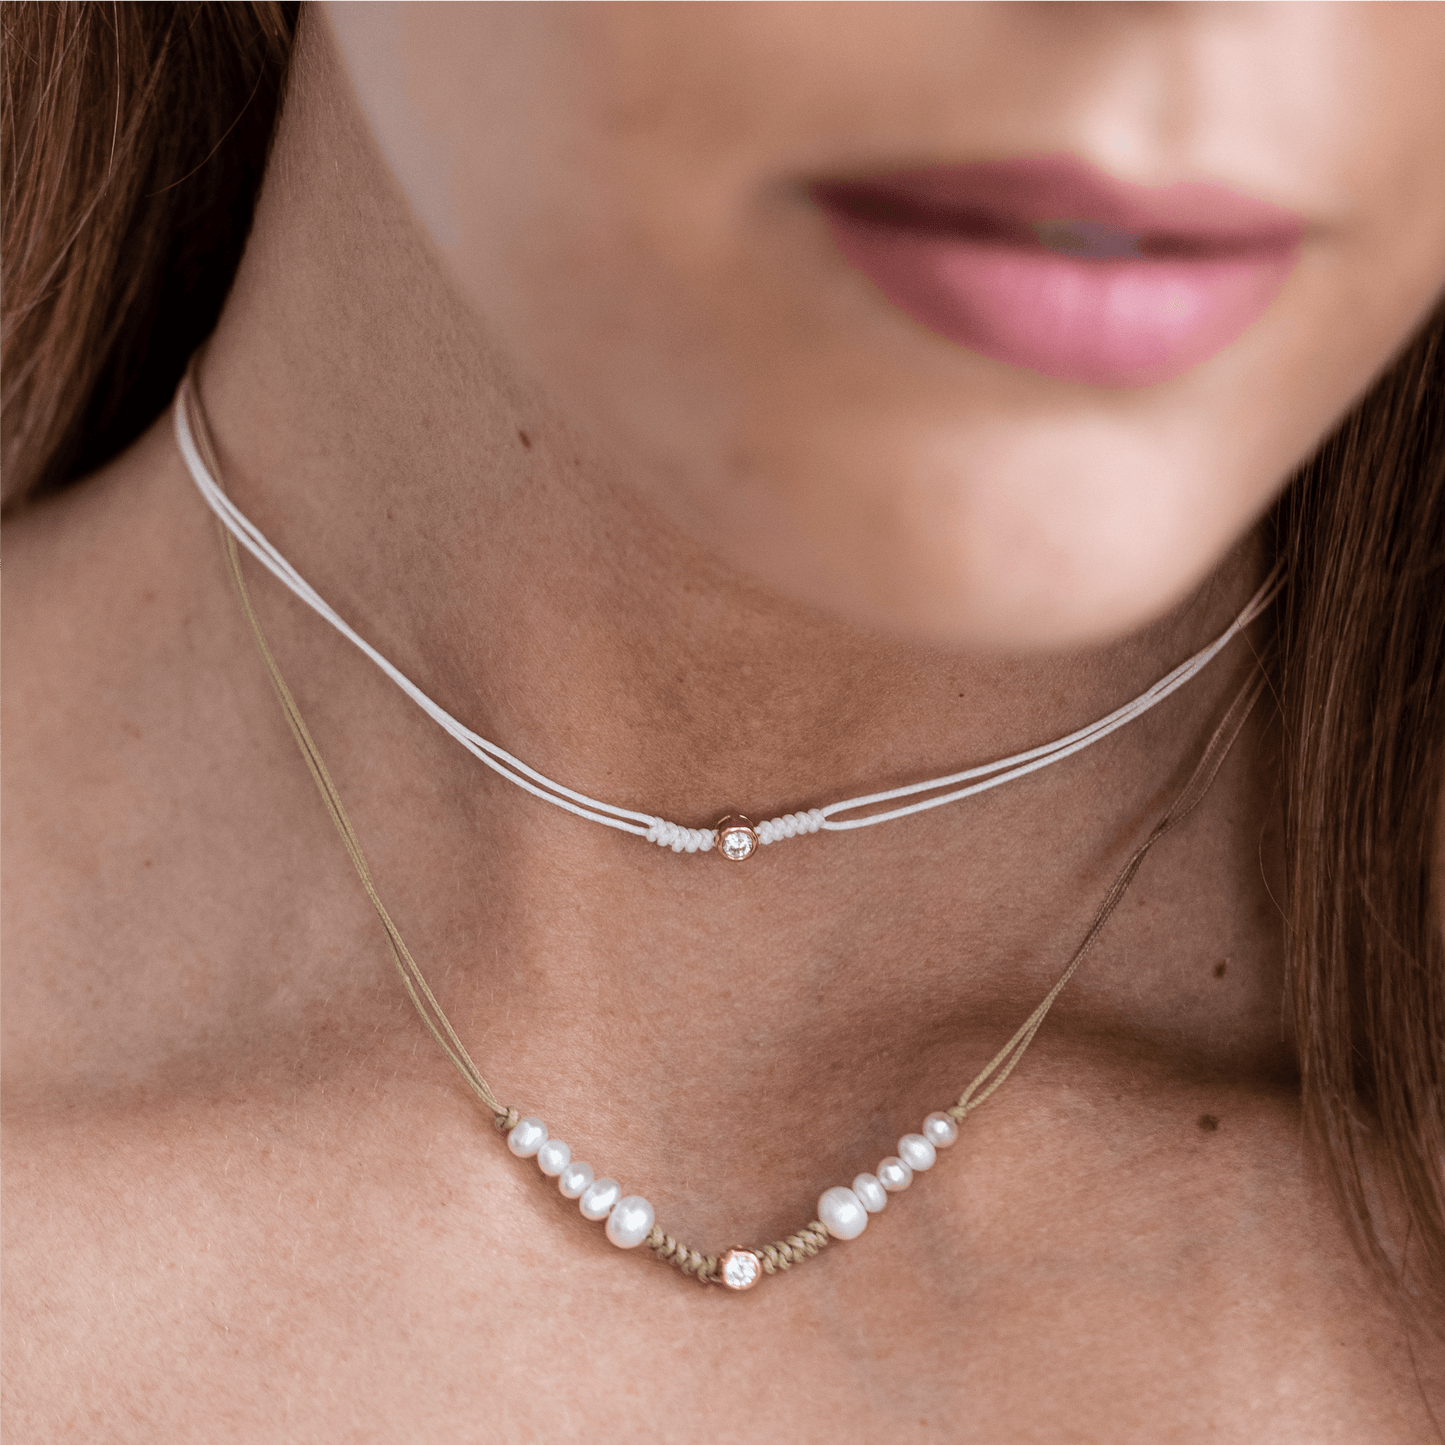 Ten Natural Pearl String of Love Necklace - 14K Yellow Gold Necklaces 14K Solid Gold 